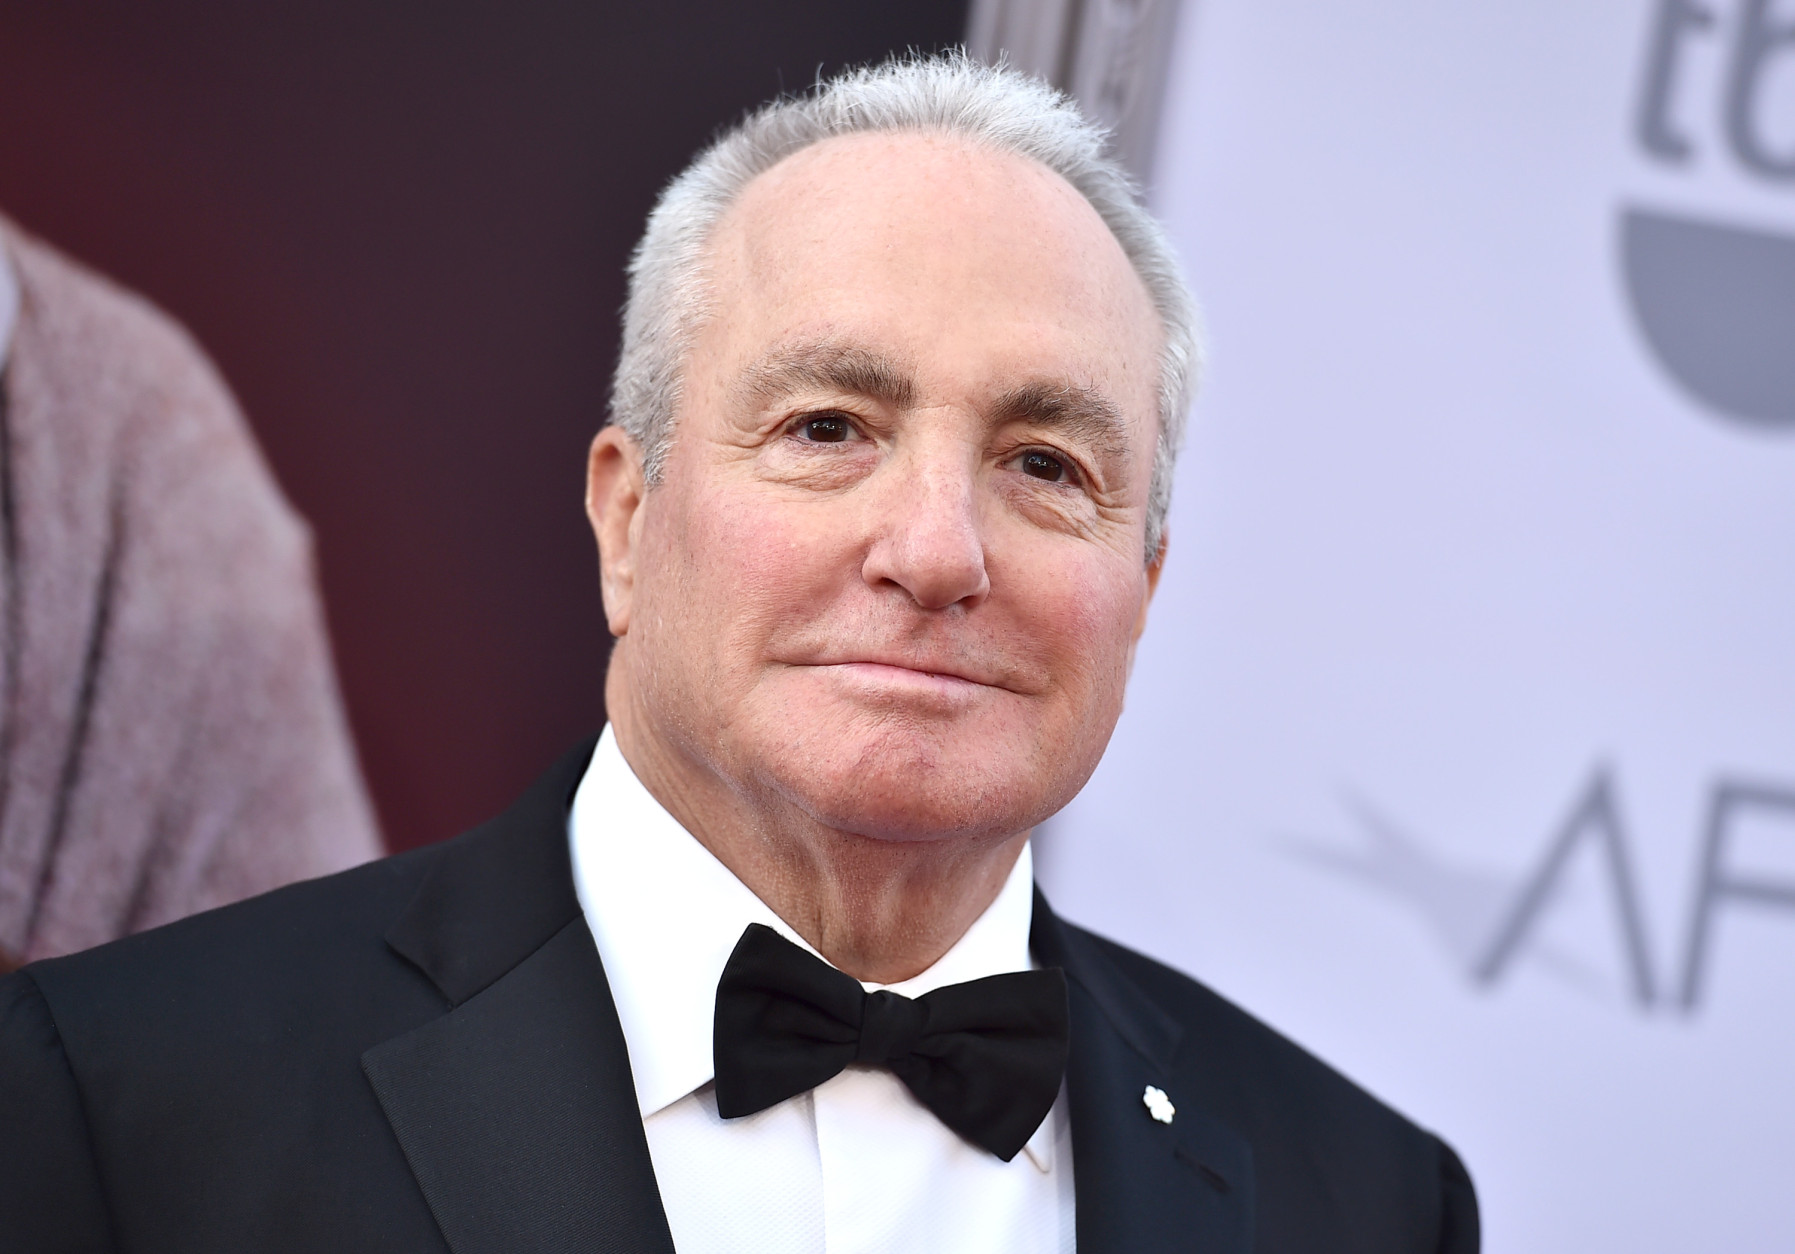 Lorne Michaels arrives at the 43rd AFI Lifetime Achievement Award Tribute Gala at the Dolby Theatre on Thursday, June 4, 2015, in Los Angeles. (Photo by Jordan Strauss/Invision/AP)